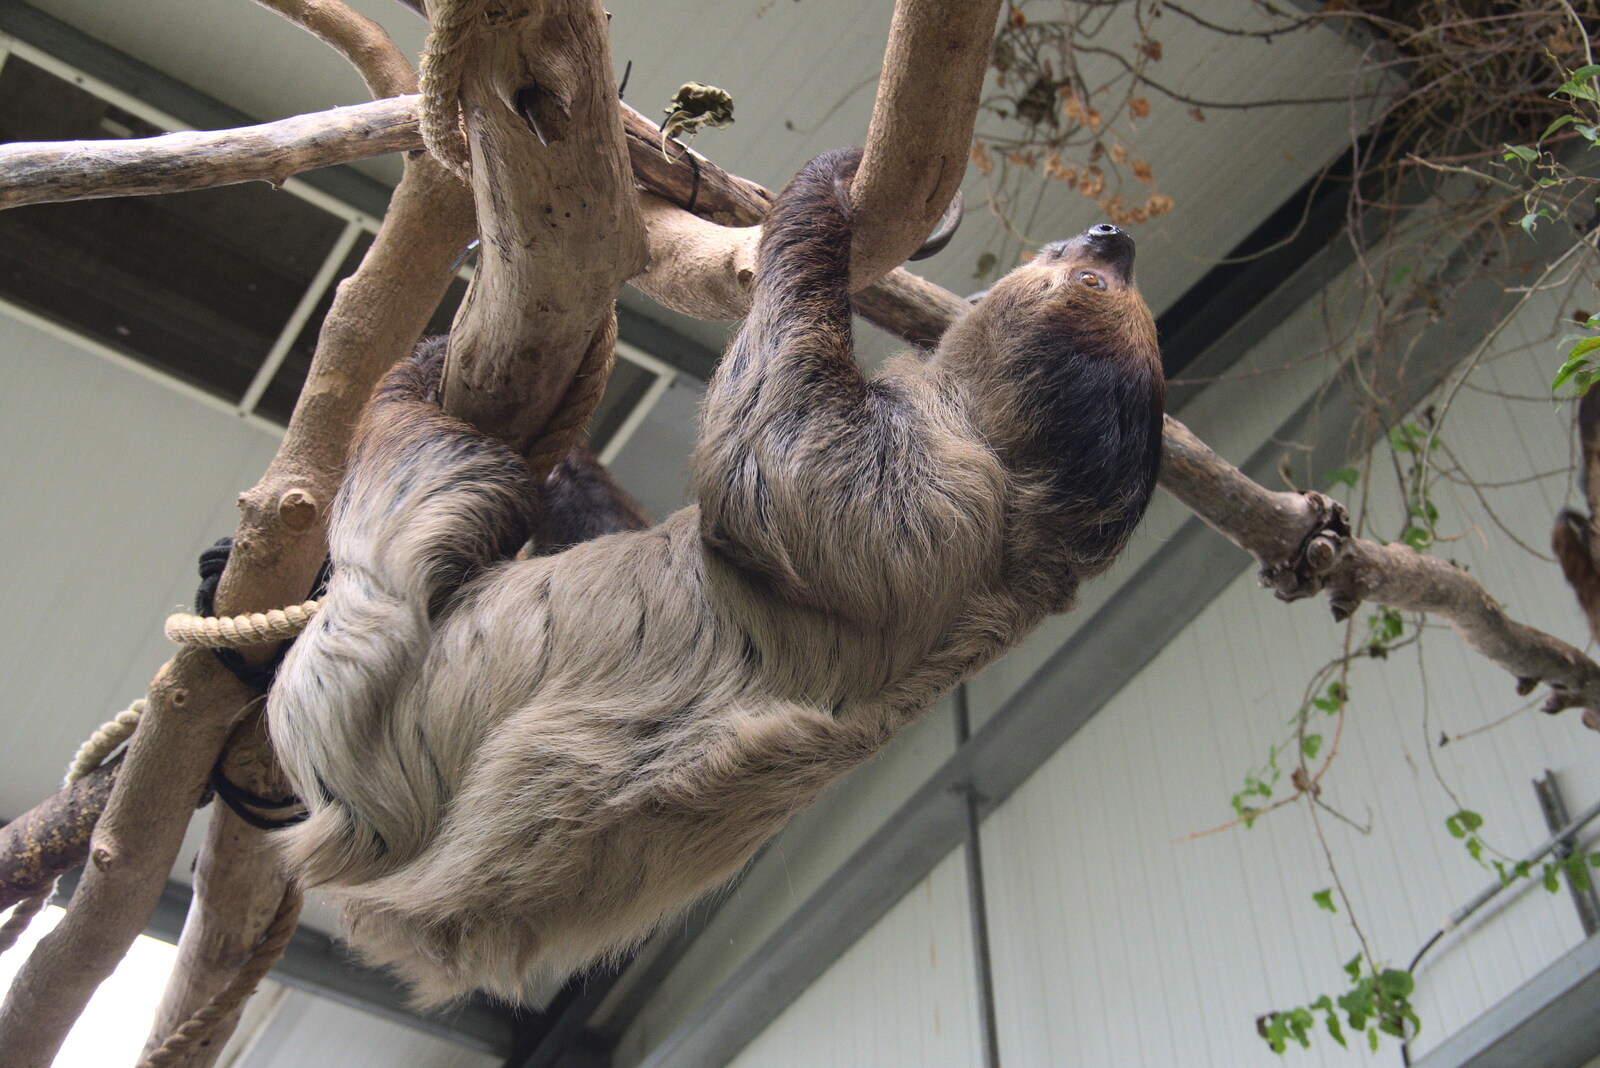 A Few Hours at the Zoo, Banham, Norfolk - 8th January 2023: A sloth trundles around on some branches